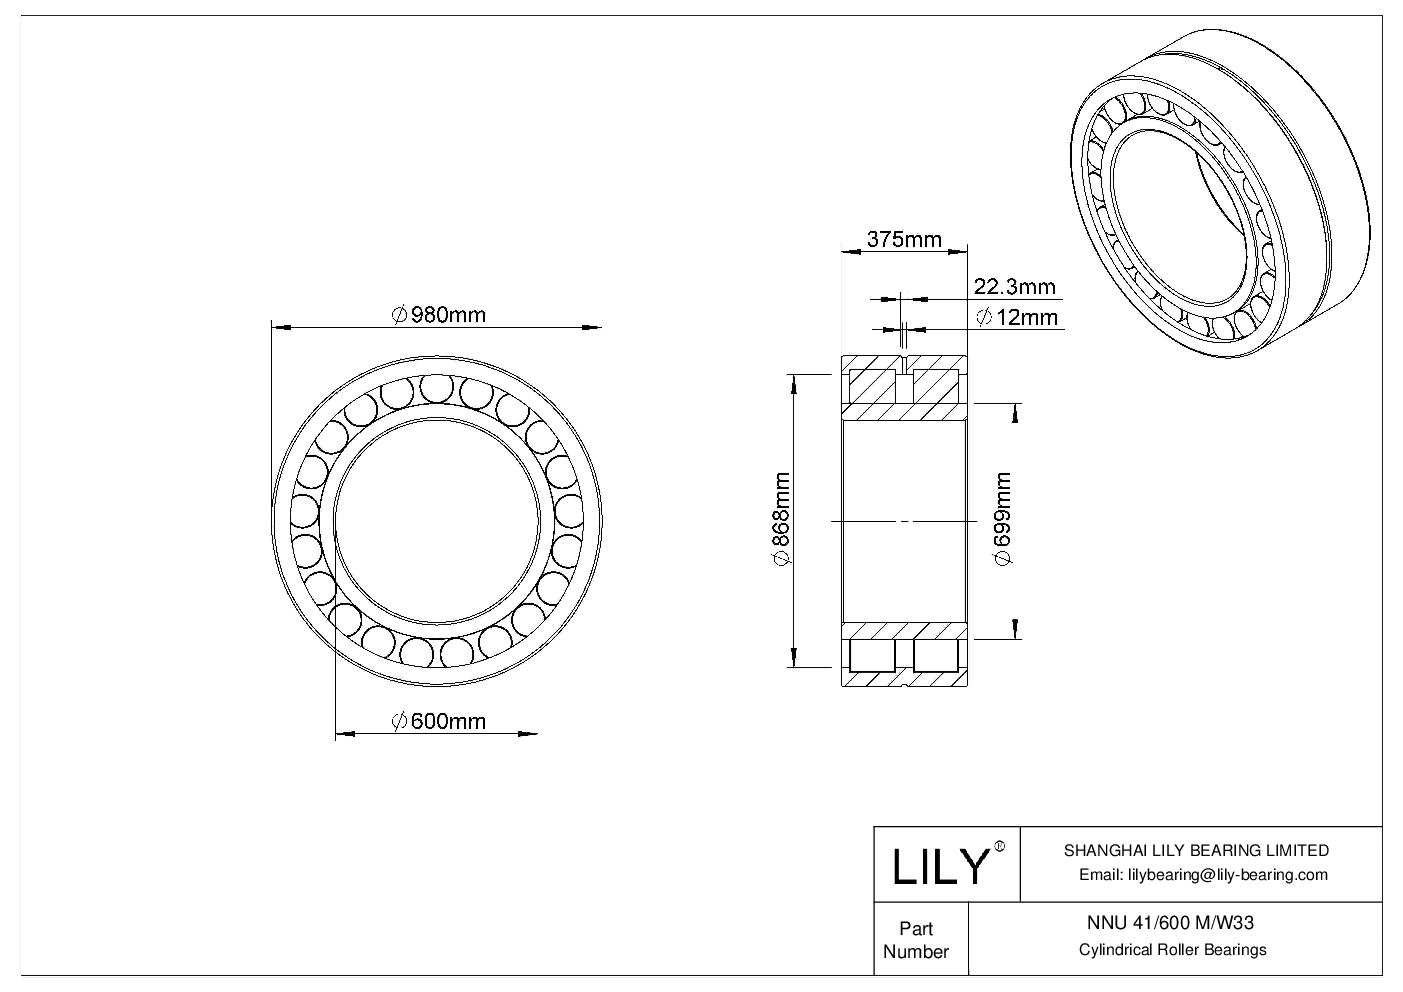 NNU 41/600 M/W33 Double Row Cylindrical Roller Bearings cad drawing